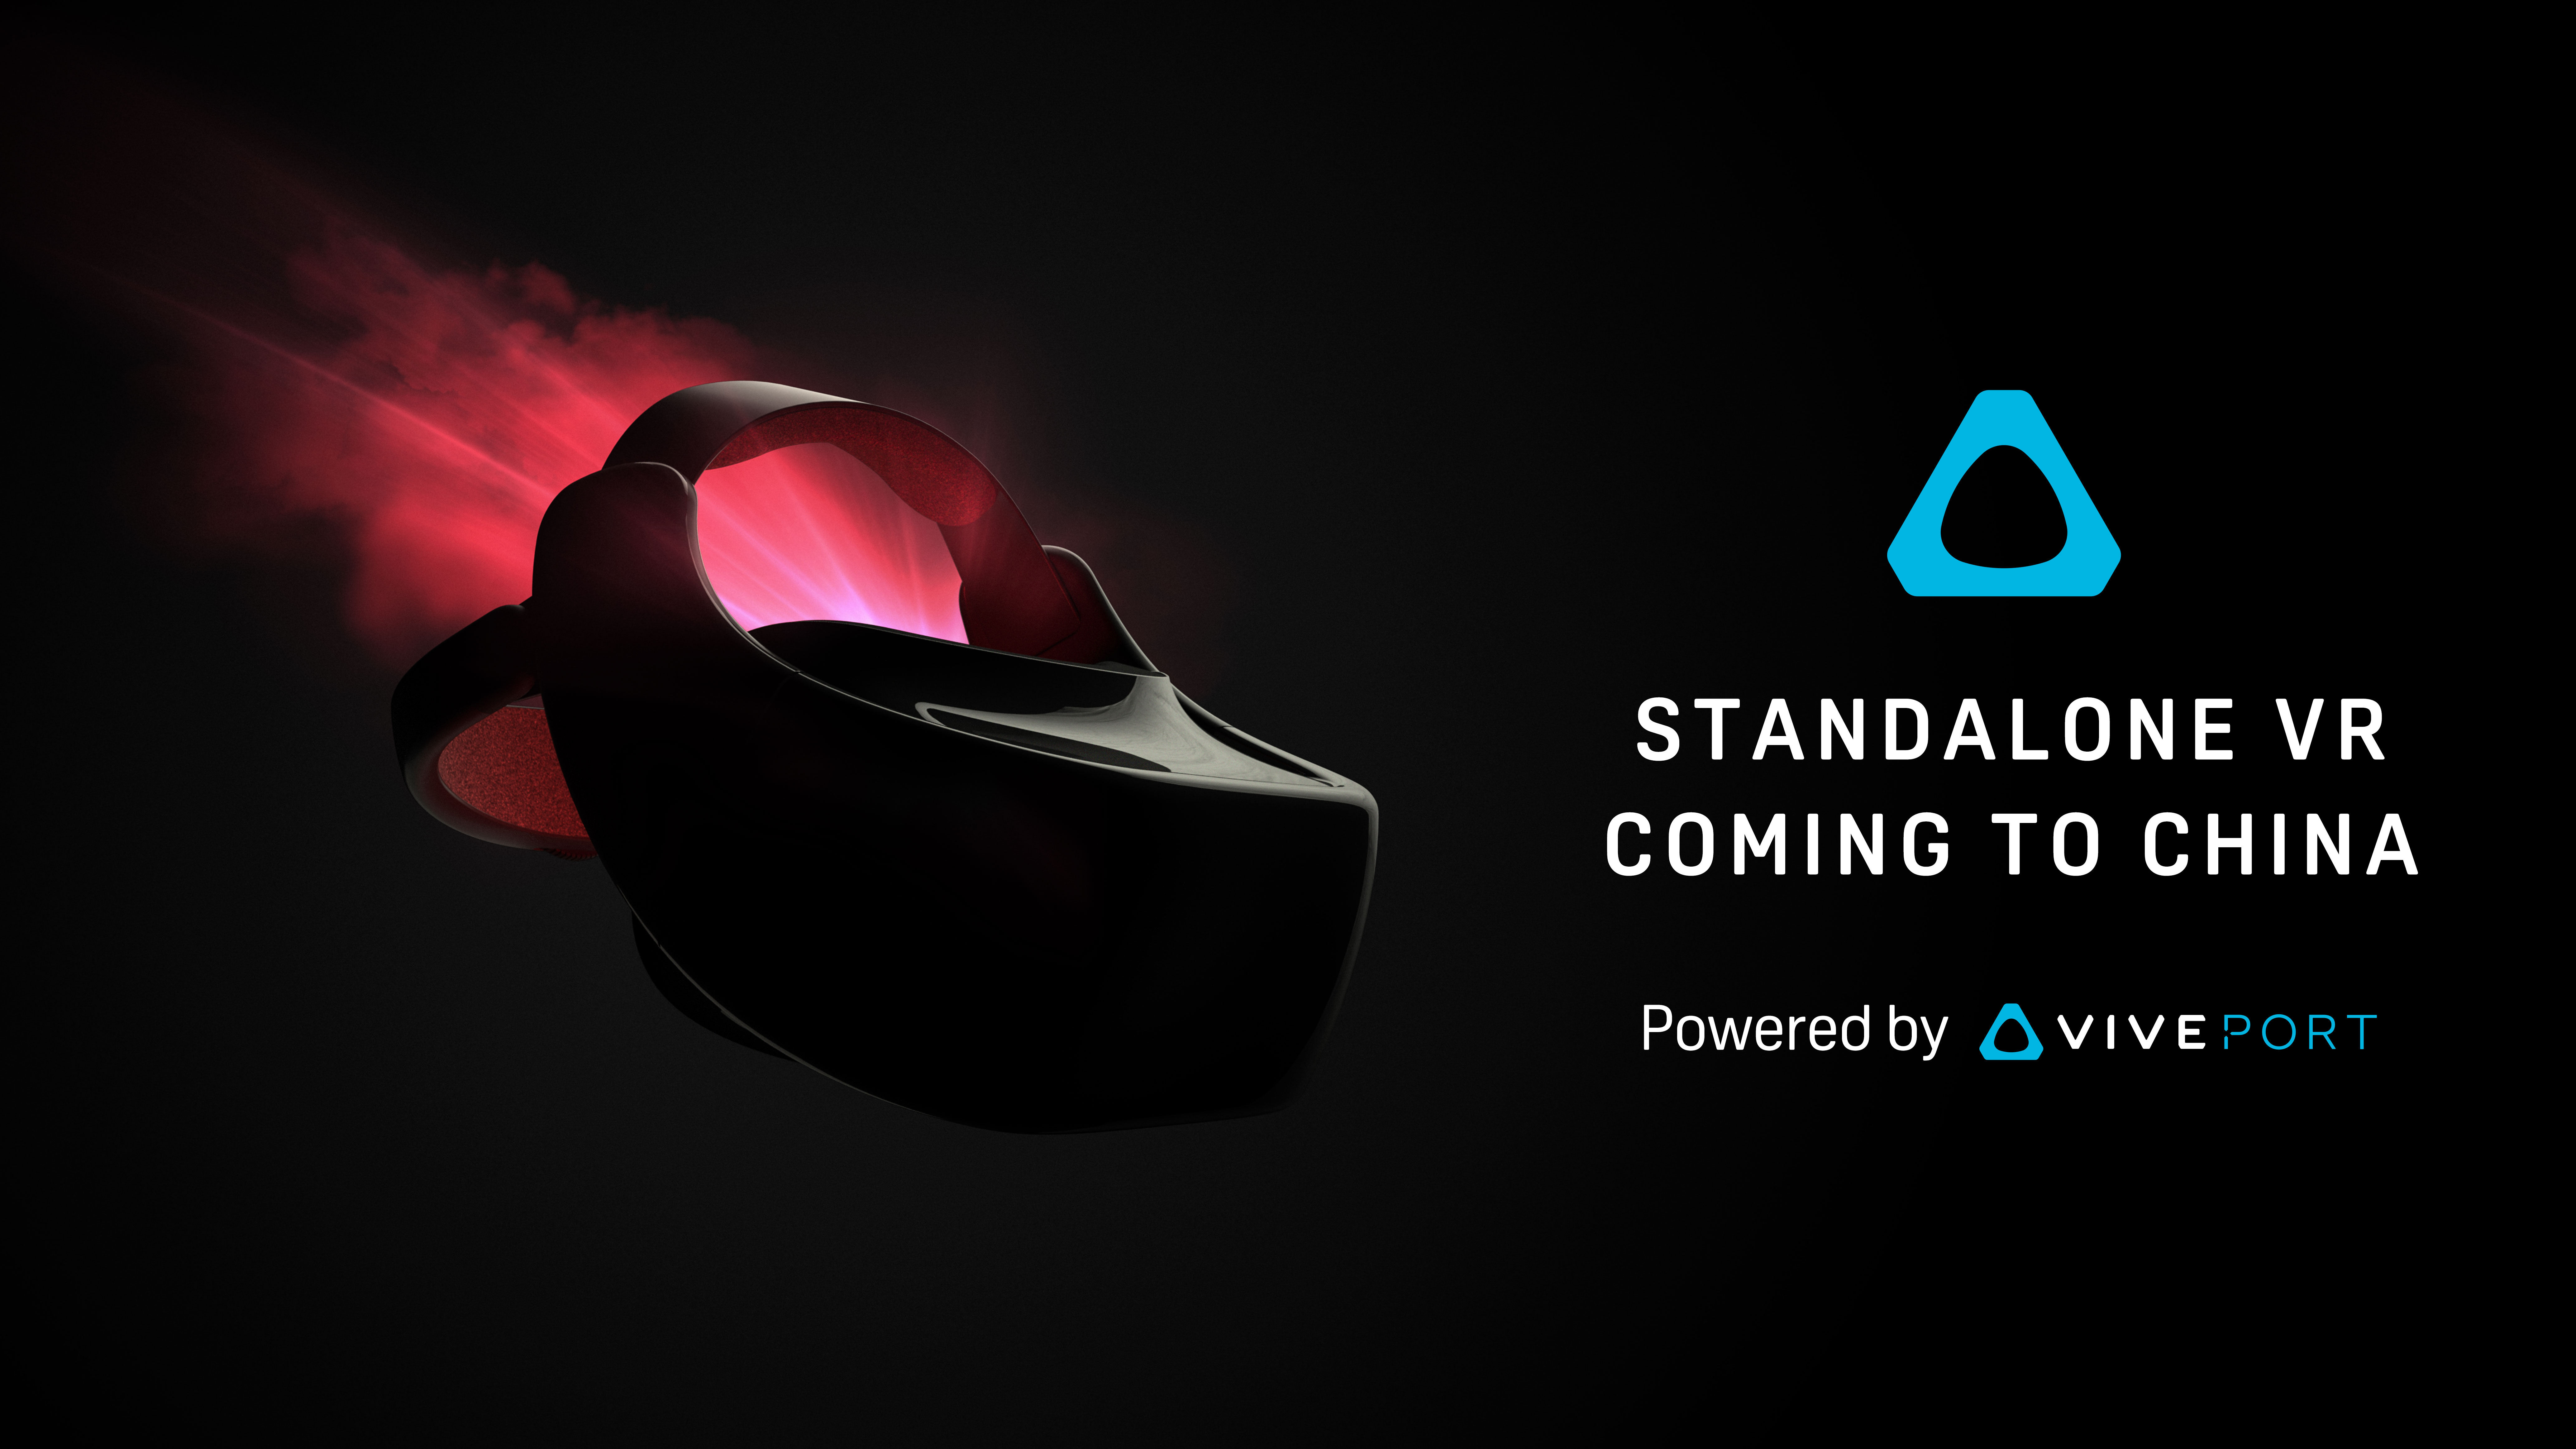 HTC teases a standalone Vive VR headset for China